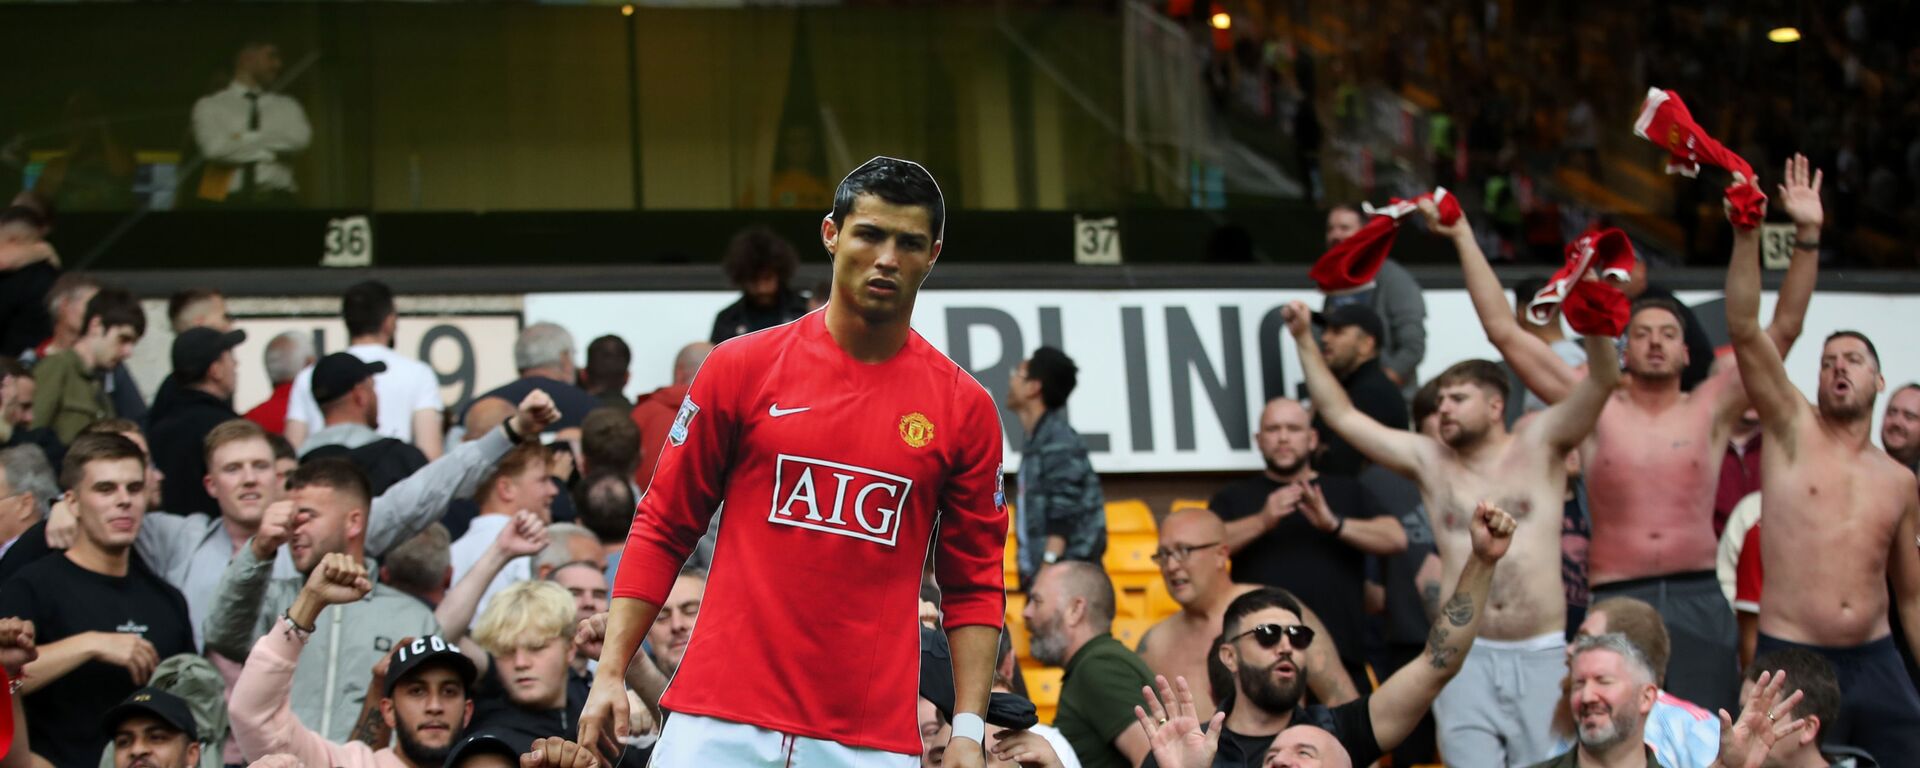 Manchester United fans hold a cutout of Cristiano Ronaldo during the game at Wolves on Sunday 29 August 2021 - اسپوتنیک افغانستان  , 1920, 03.09.2021